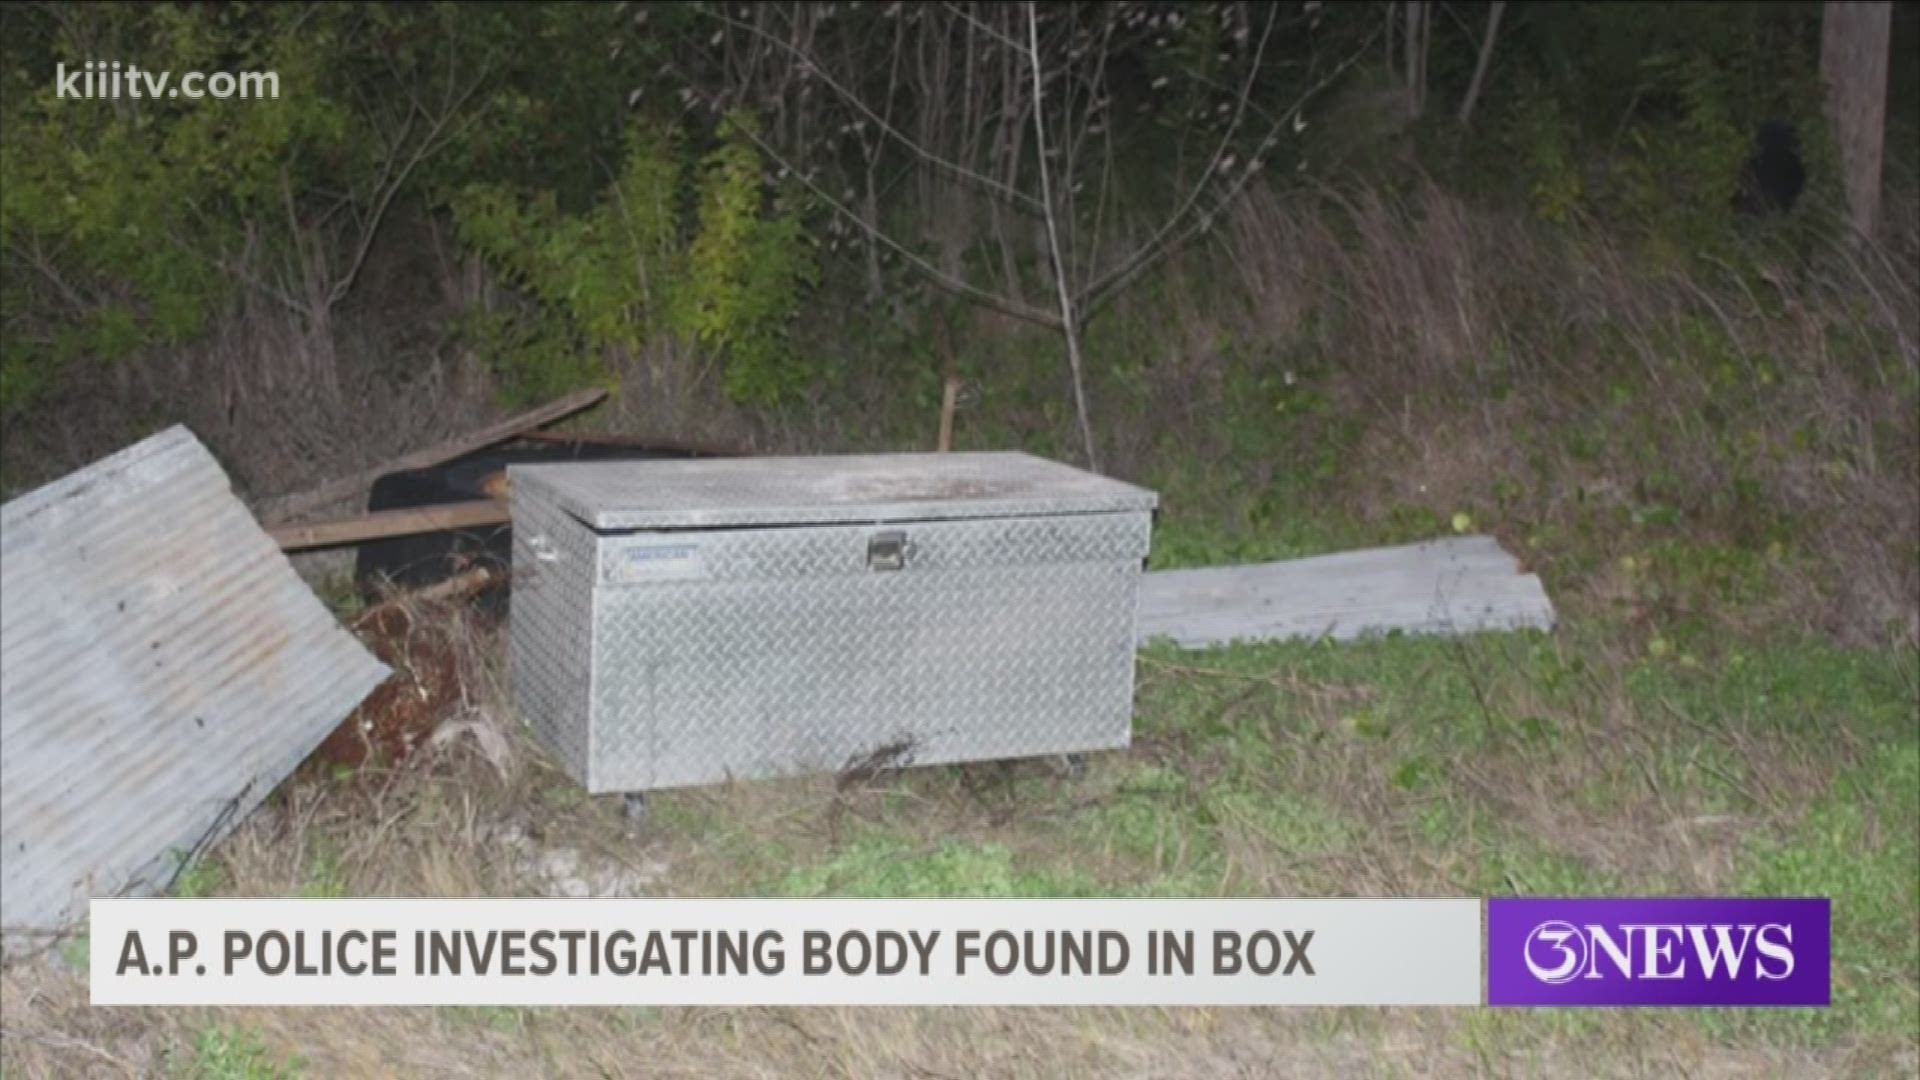 Aransas Pass police are trying to find out who owns a toolbox found Tuesday containing the body of a 29-year-old woman.